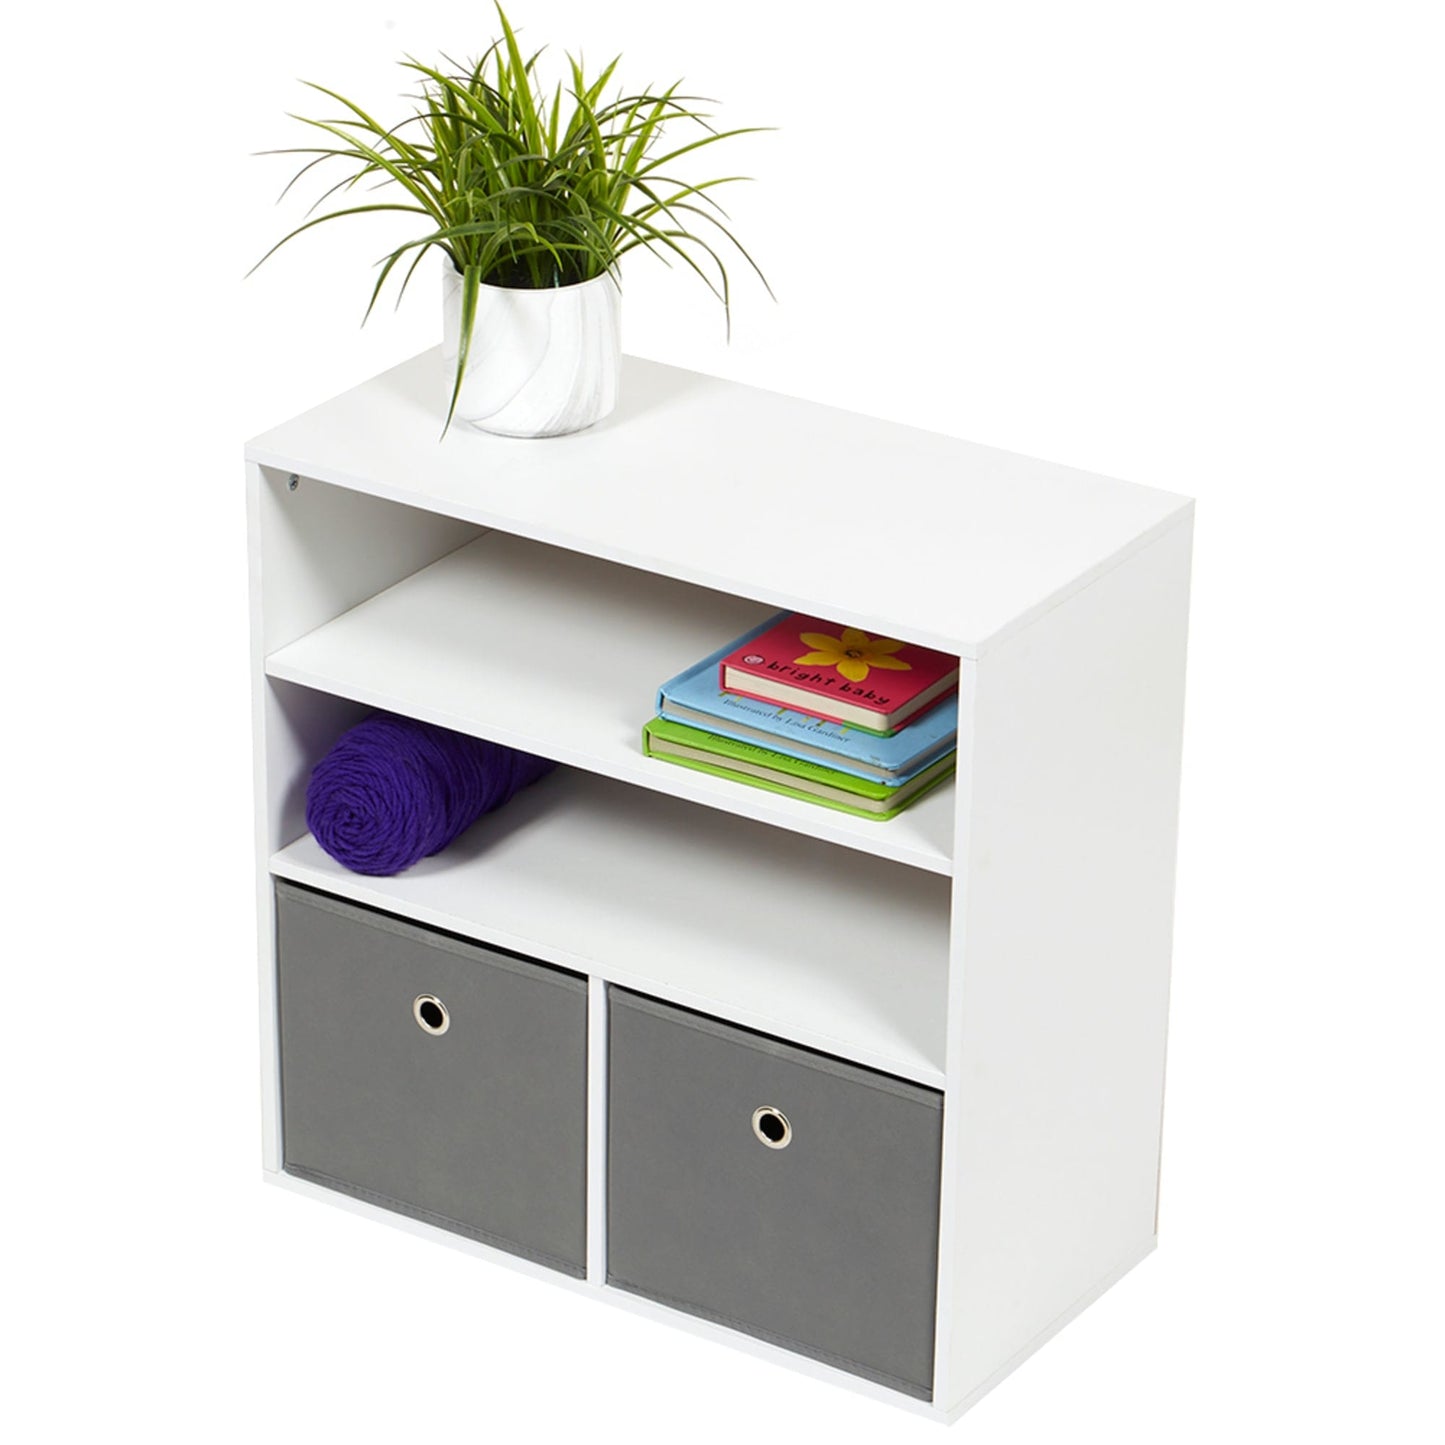 2 Cube Shelf with Two Non-Woven Bins, White